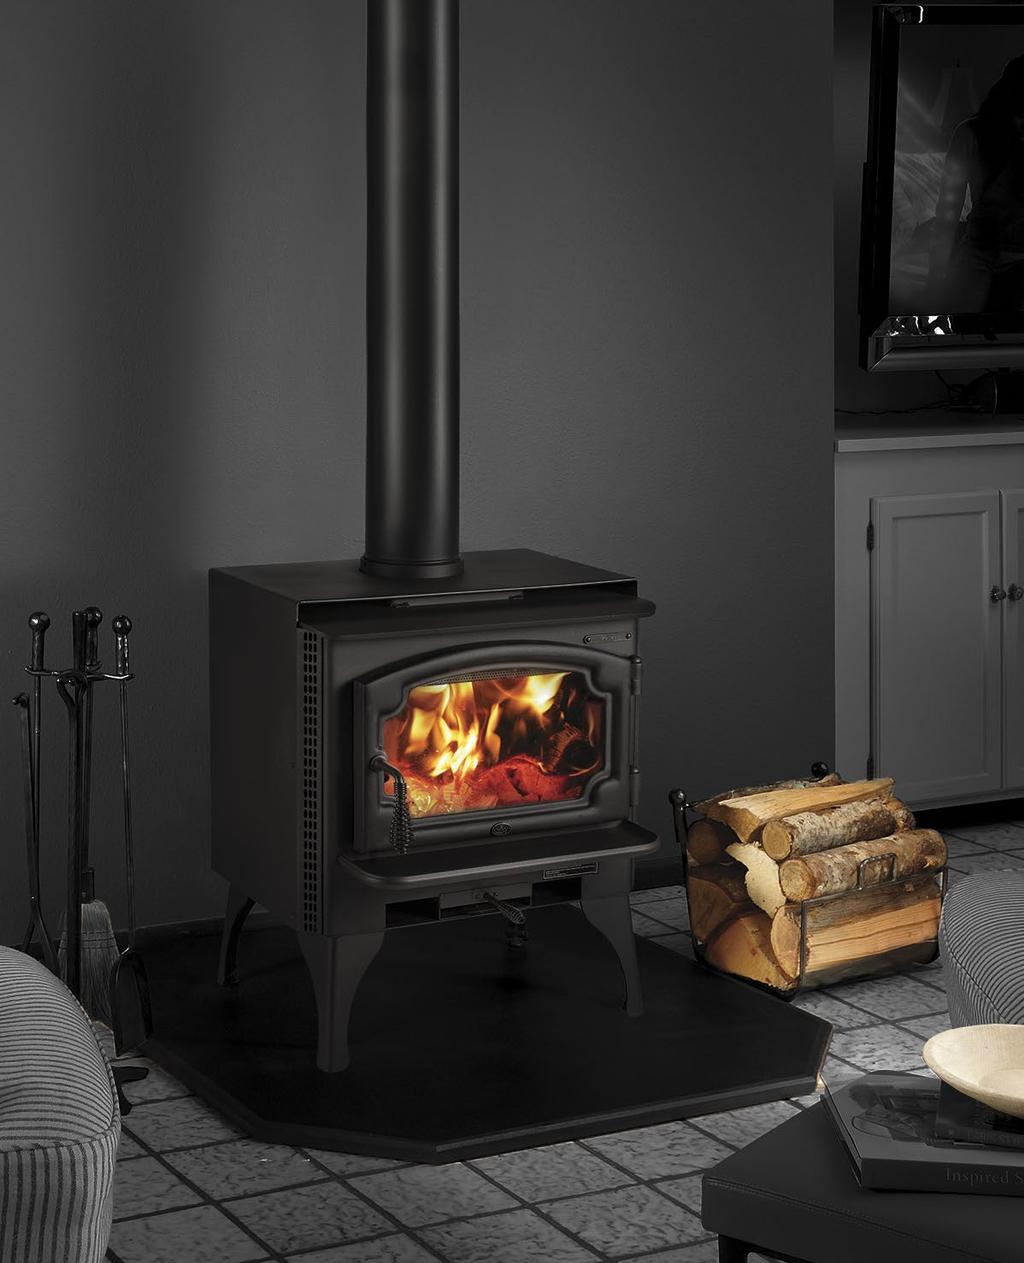 05 cubic metre firebox is larger than most other small stoves, so it offers longer burn times with less reloading.